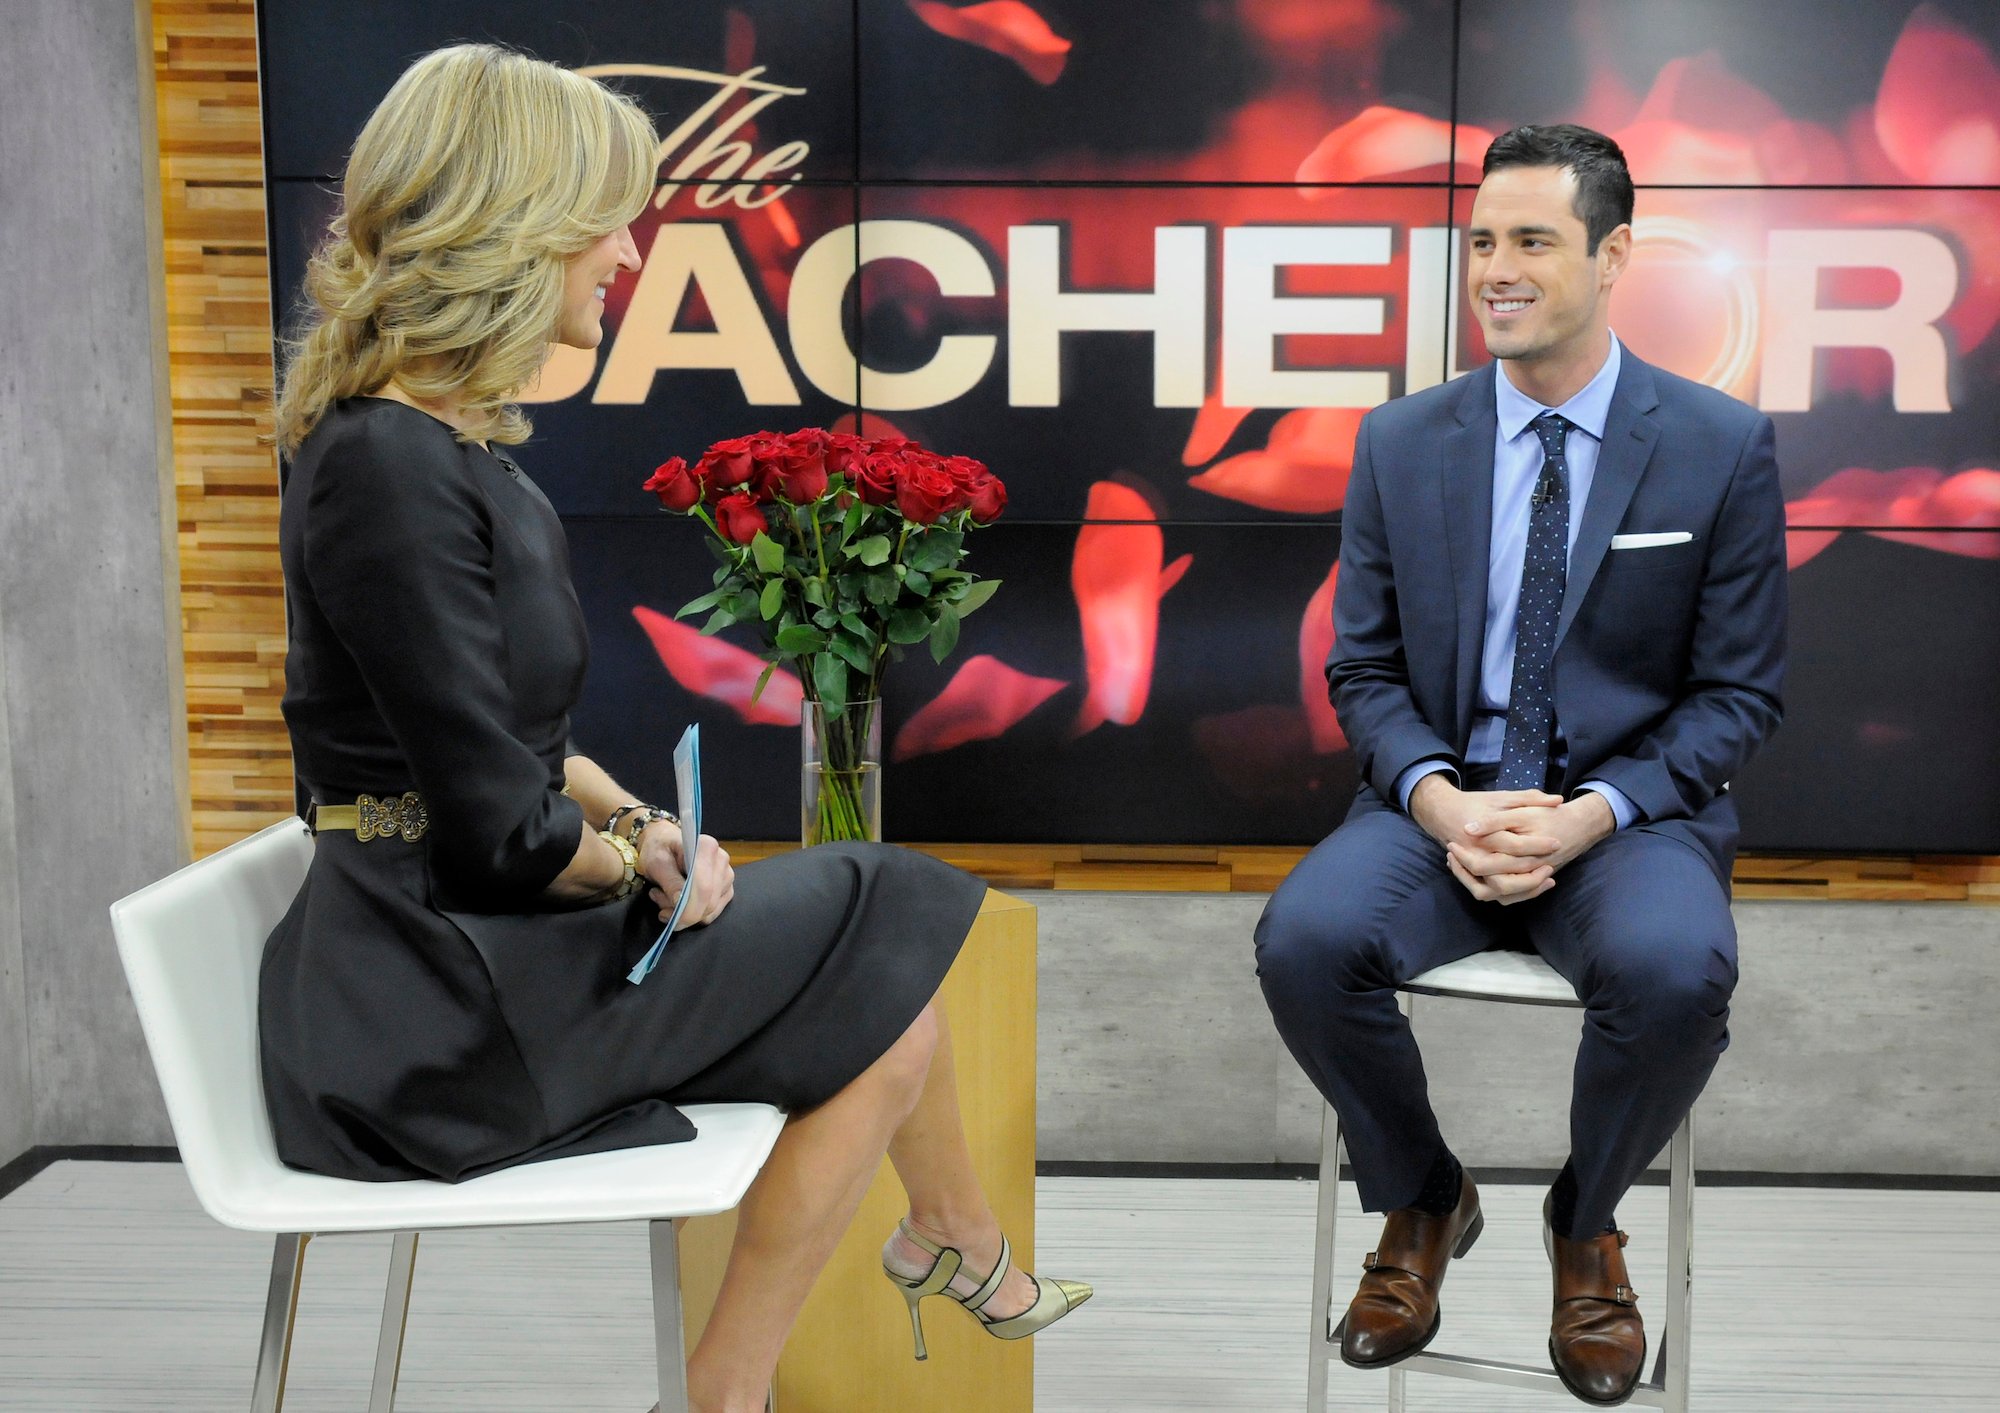 'The Bachelor' star Ben Higgins wearing a navy suit on 'Good Morning America'